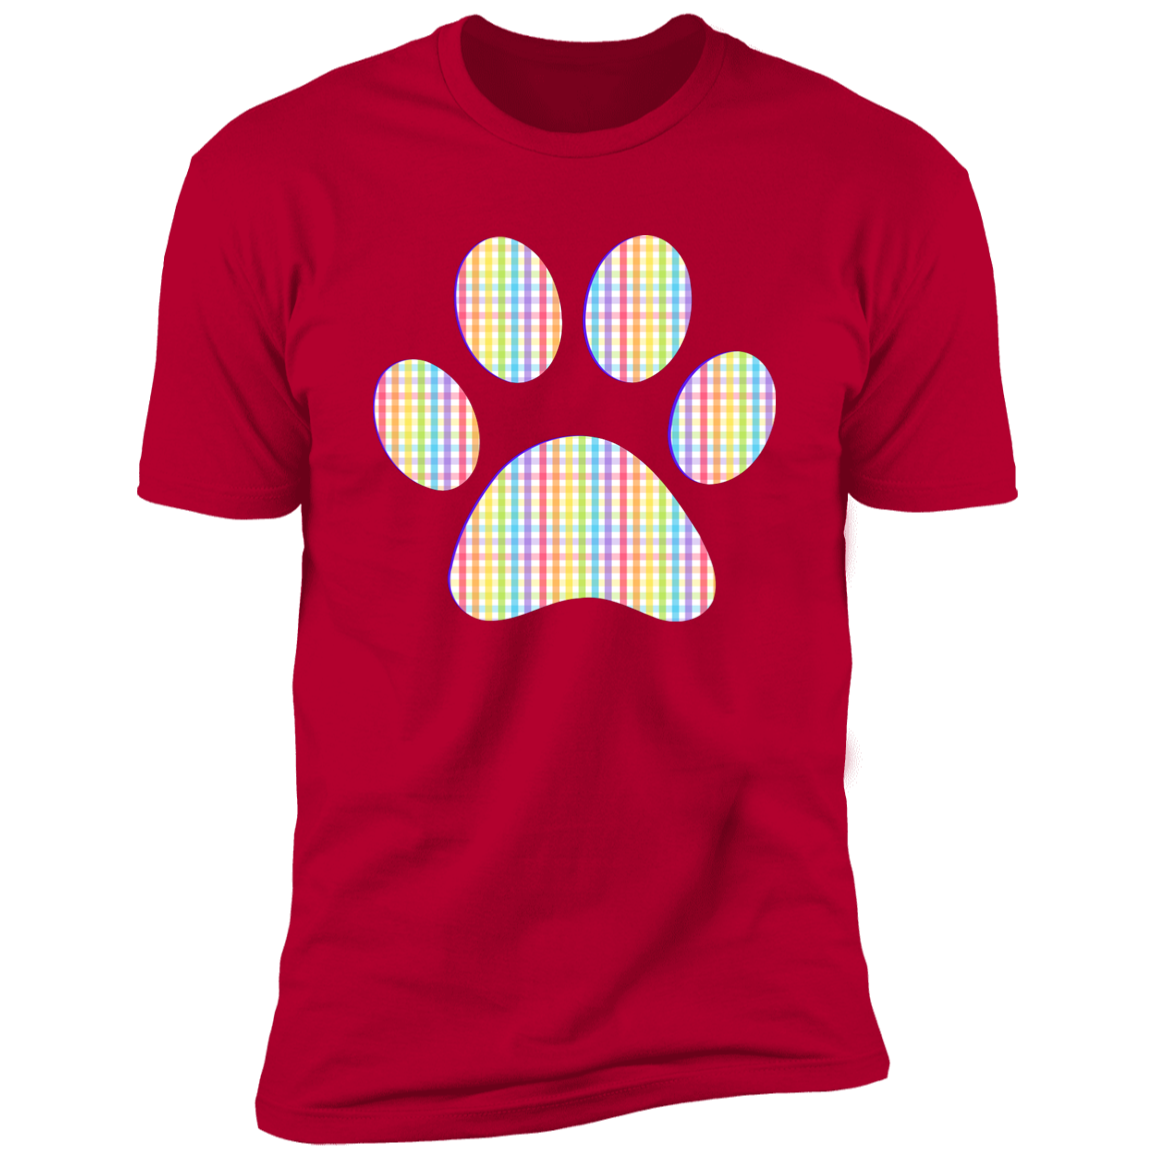 Pride Paw (Gingham) Pride T-shirt, Paw Pride Dog Shirt for humans, in red